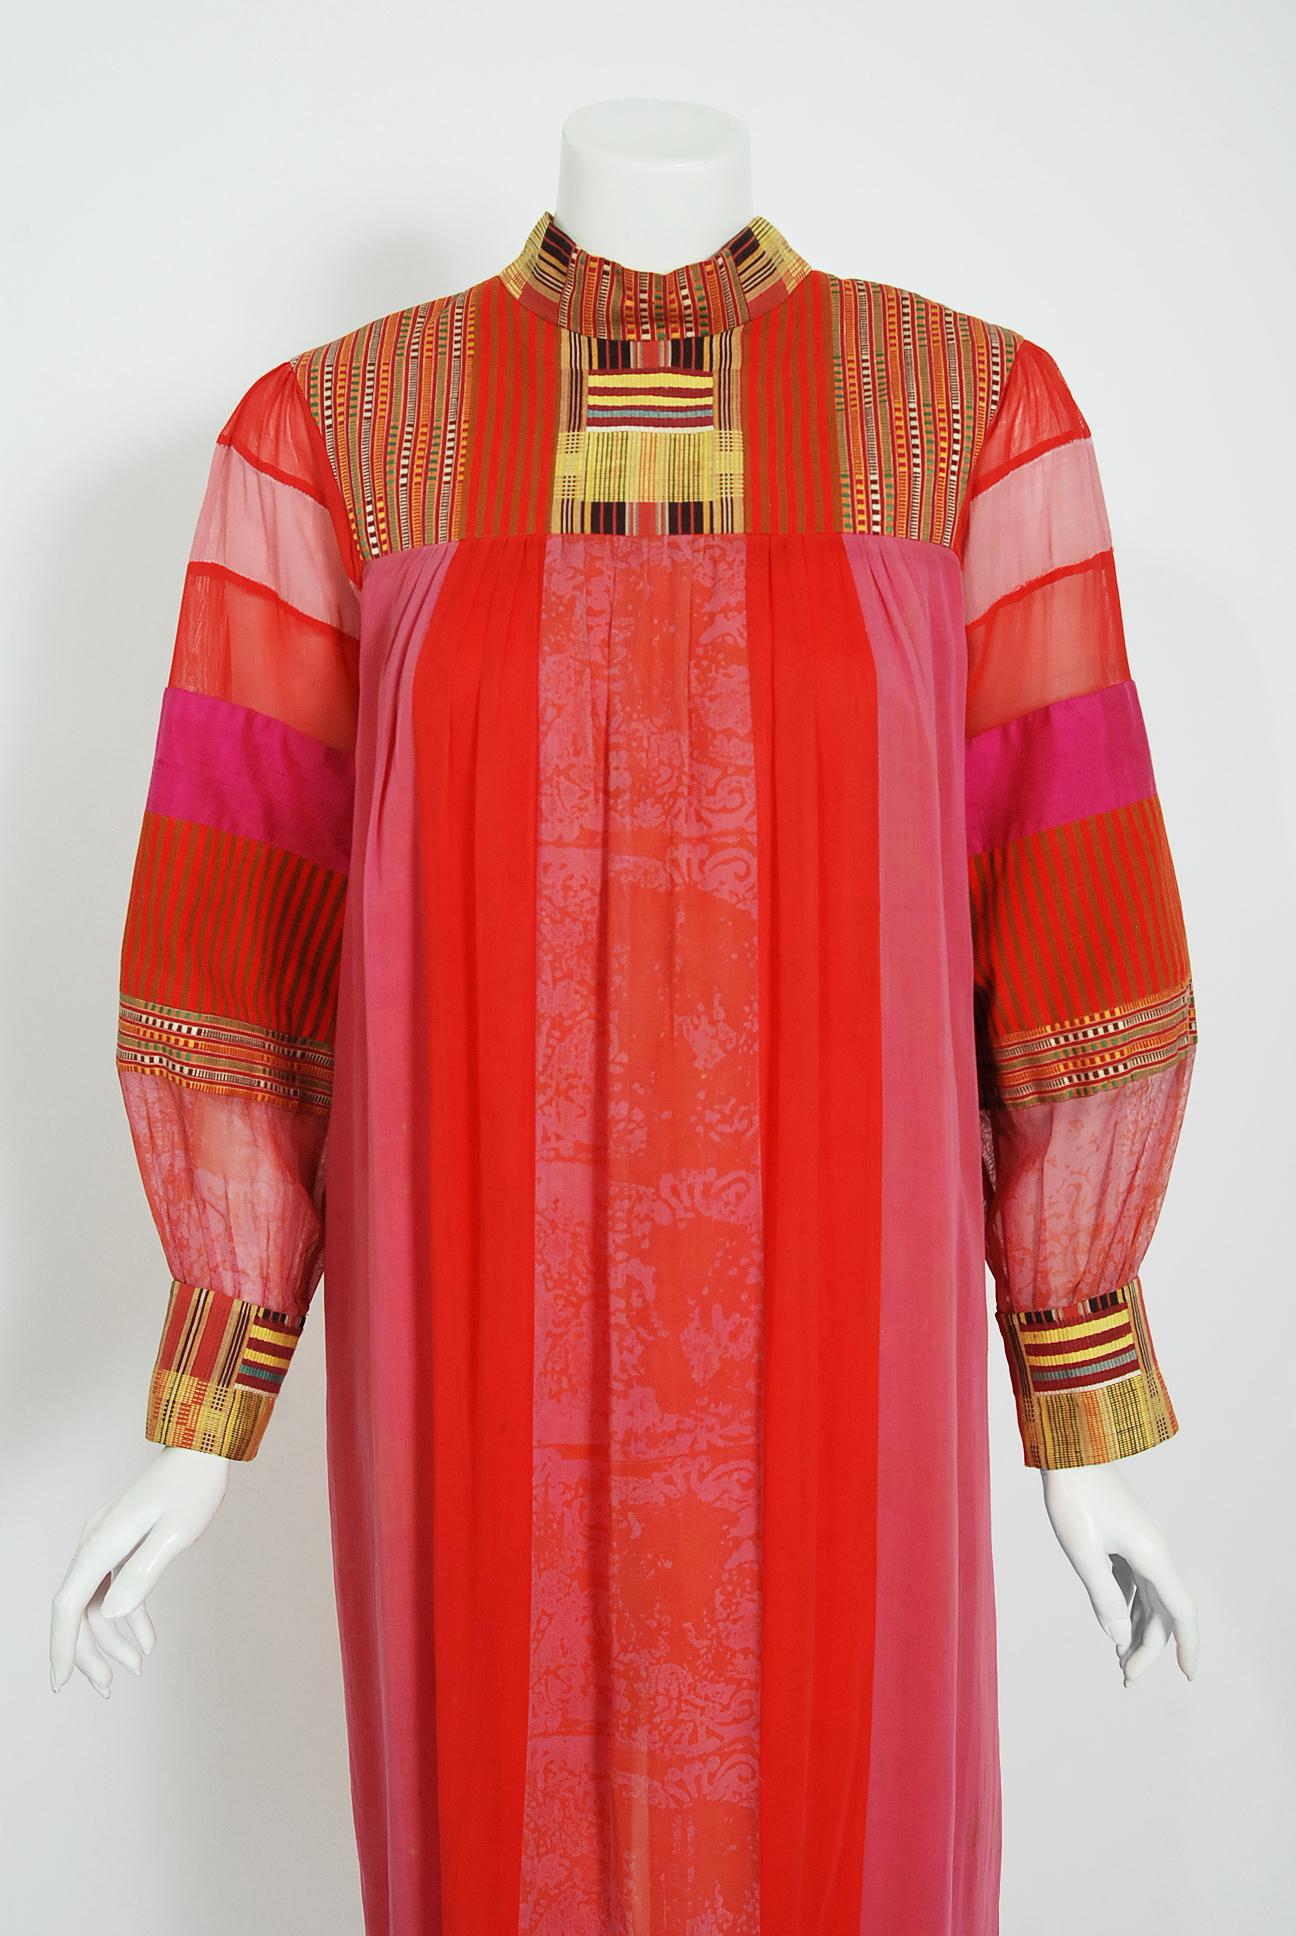 A vibrant, early 1970's Joann Lopez designer embroidered cotton dress straight from Zsa Zsa Gabor's wardrobe. This dress dates back to the height of the bohemian craze and was sold to Zsa Zsa at a high-end Los Angeles boutique. The garment is